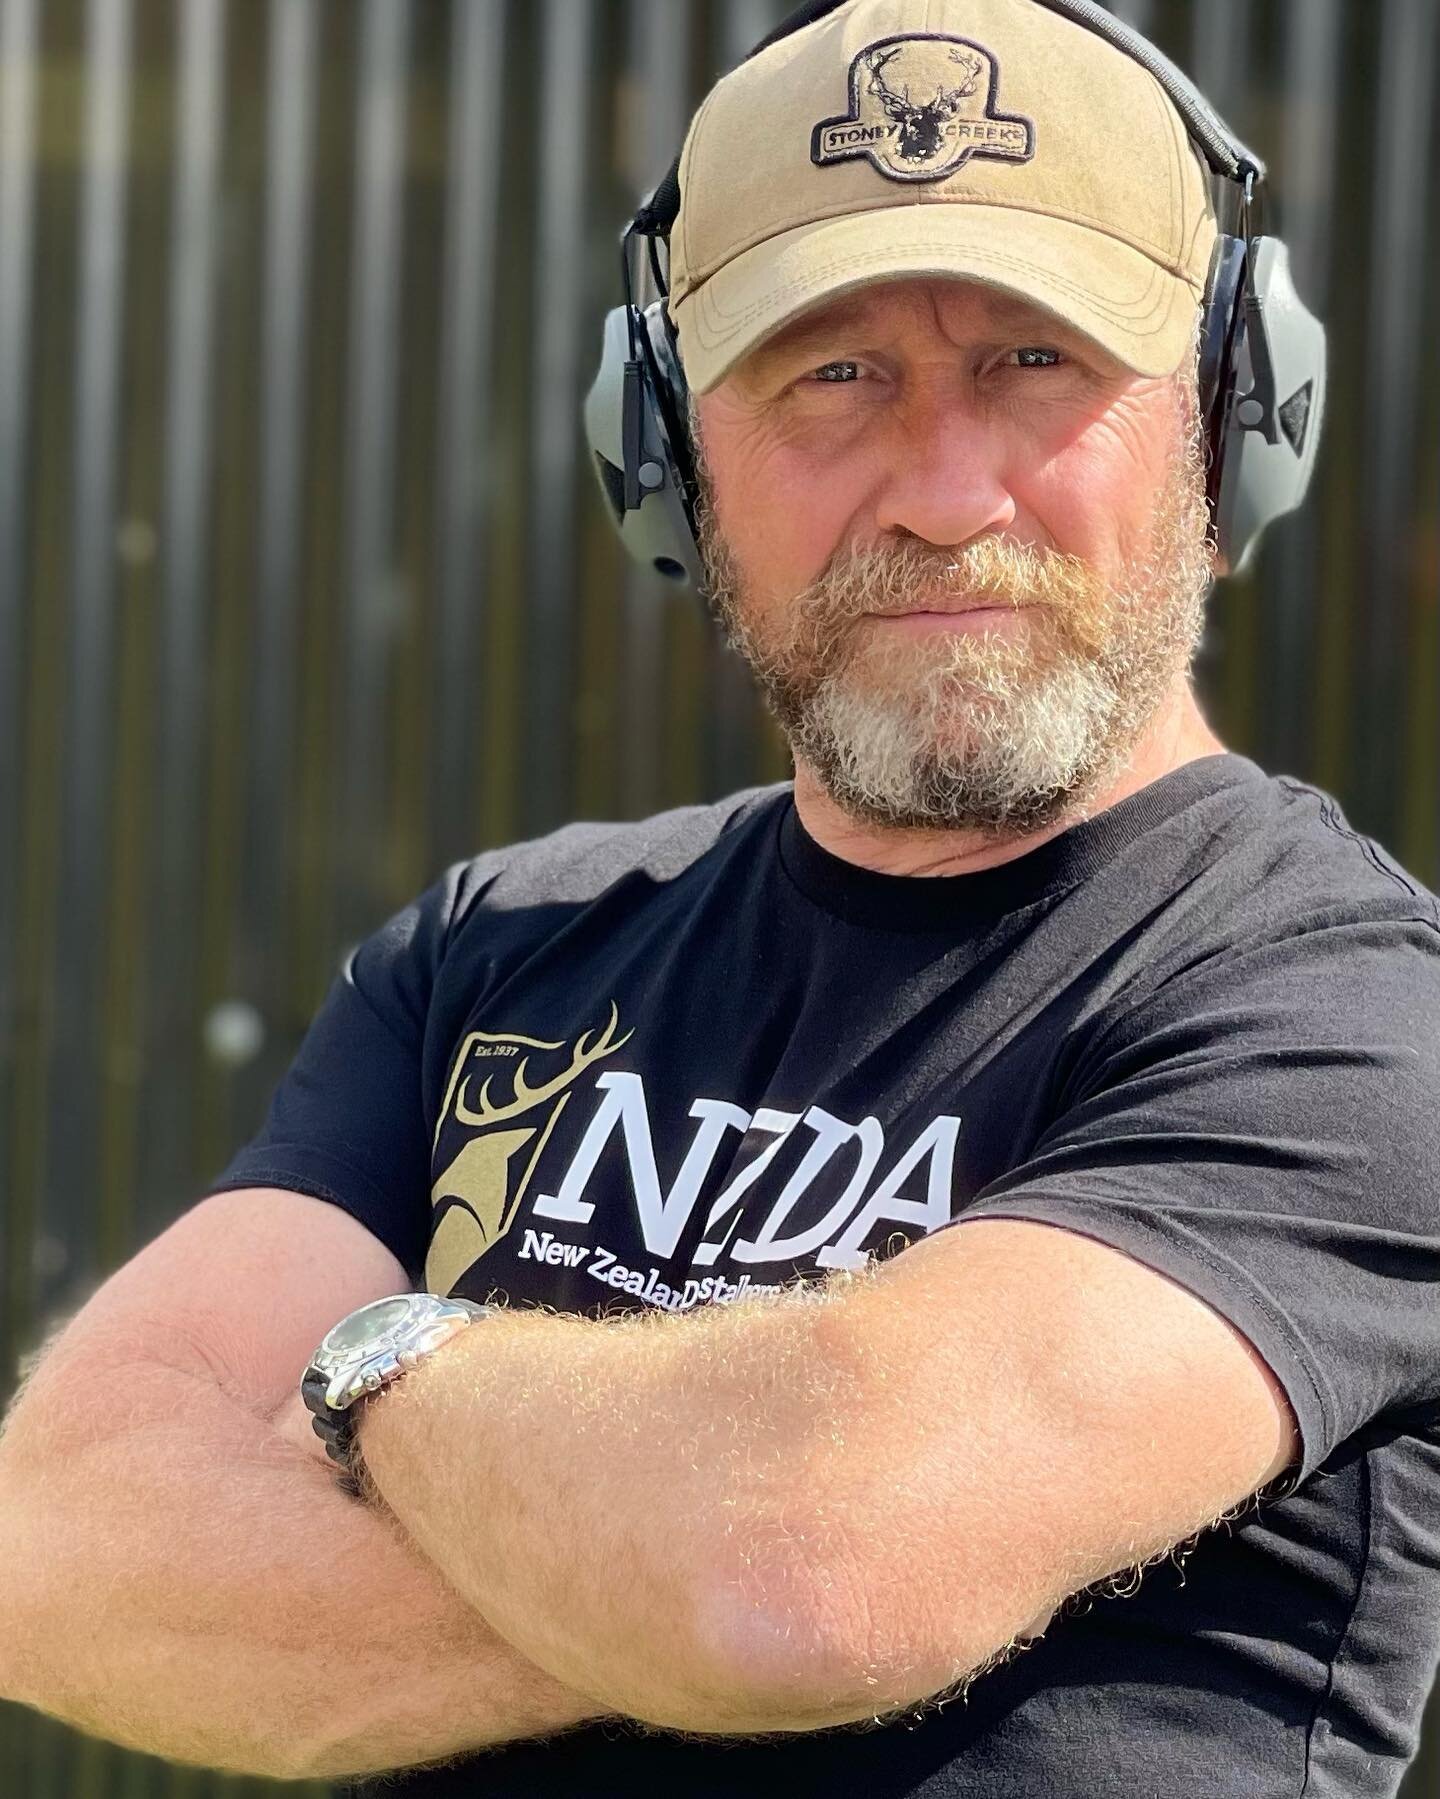 Propest Range Day - the weather was ideal &amp; superb at the NZDA rifle range in Riverhead - Jordan was zero&rsquo;d in and on target 🎯 😎👍🏼🤩